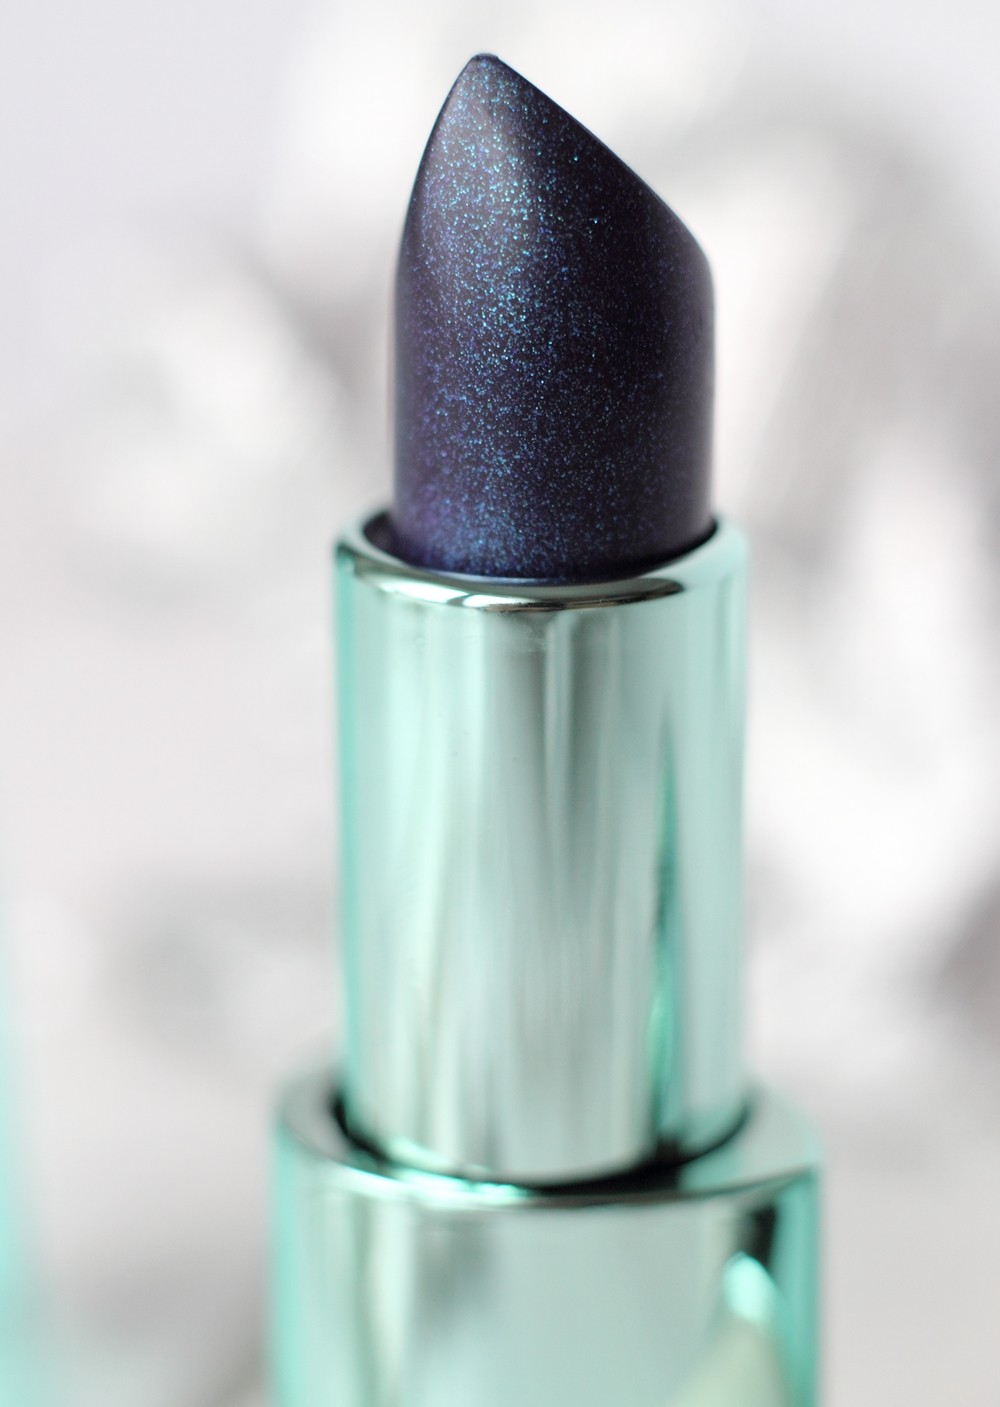 P2 Limited Edition The future is mine Beyond Infinity Lippenstift 020 Midnight Shimmer